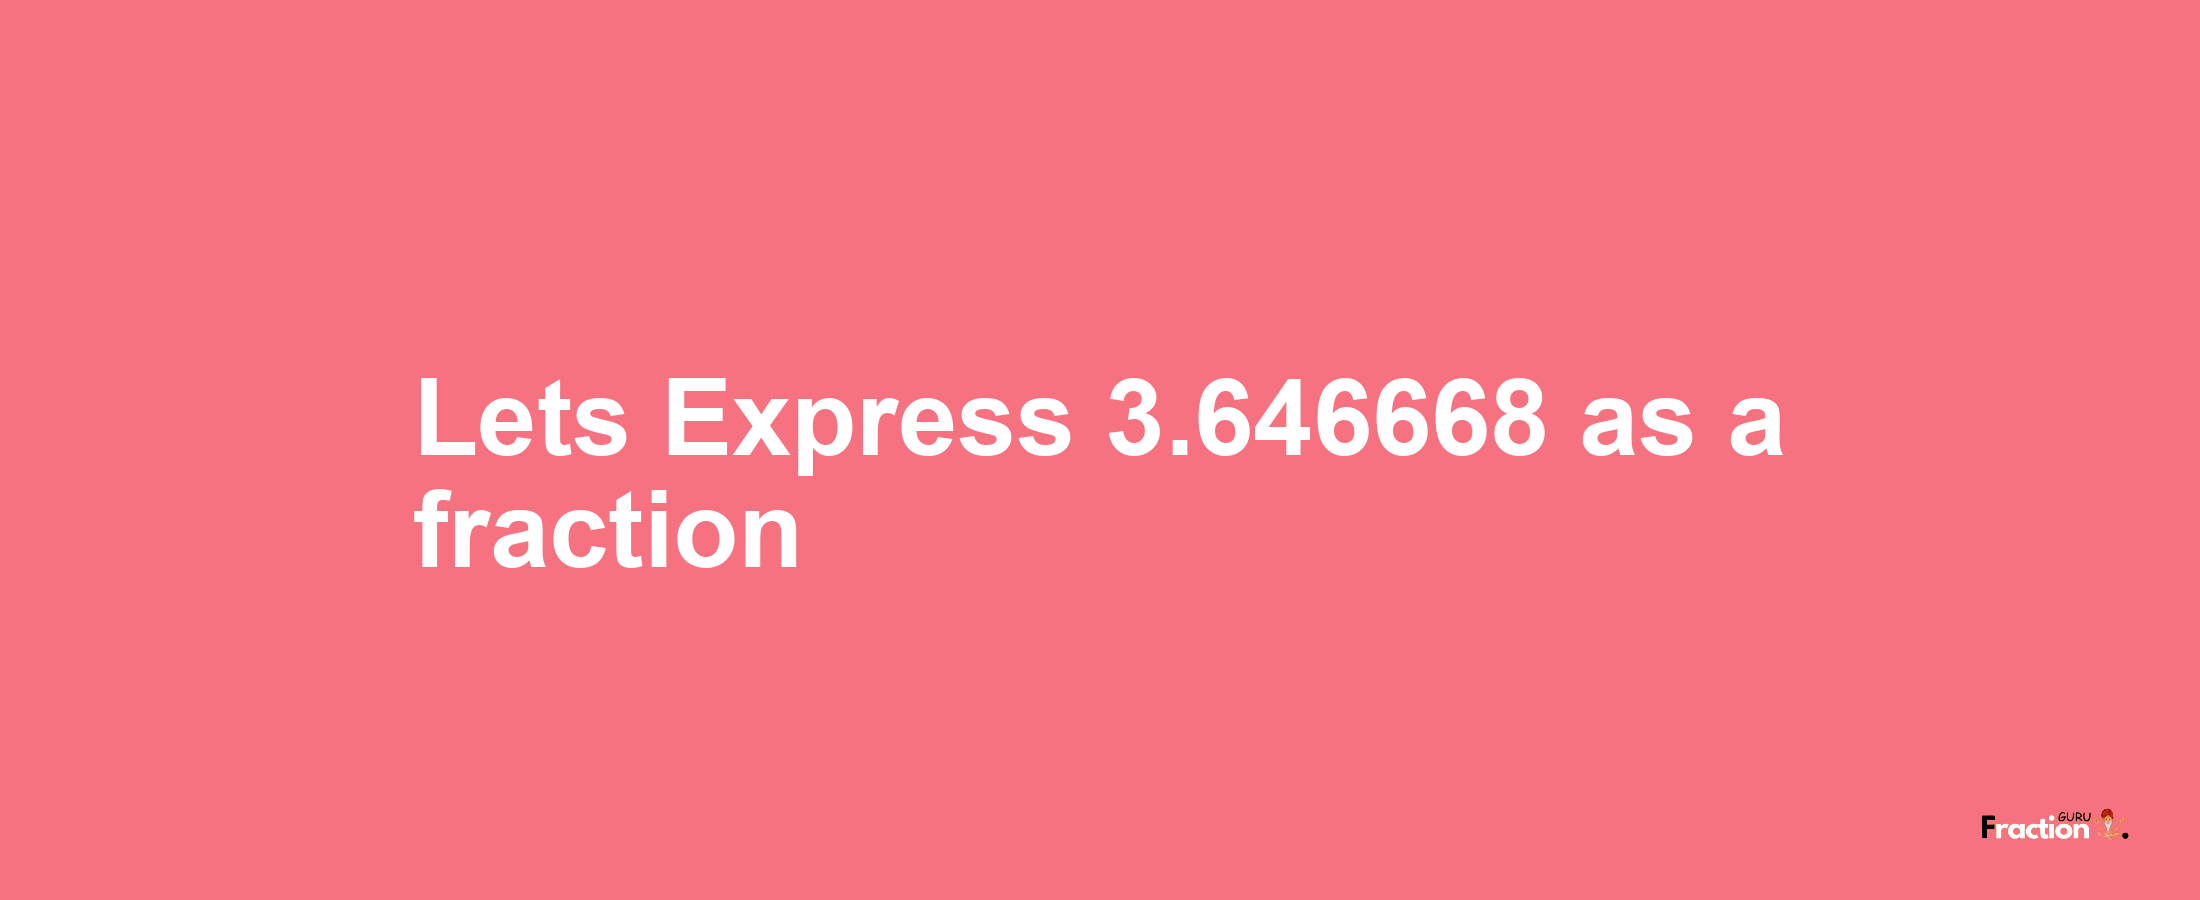 Lets Express 3.646668 as afraction